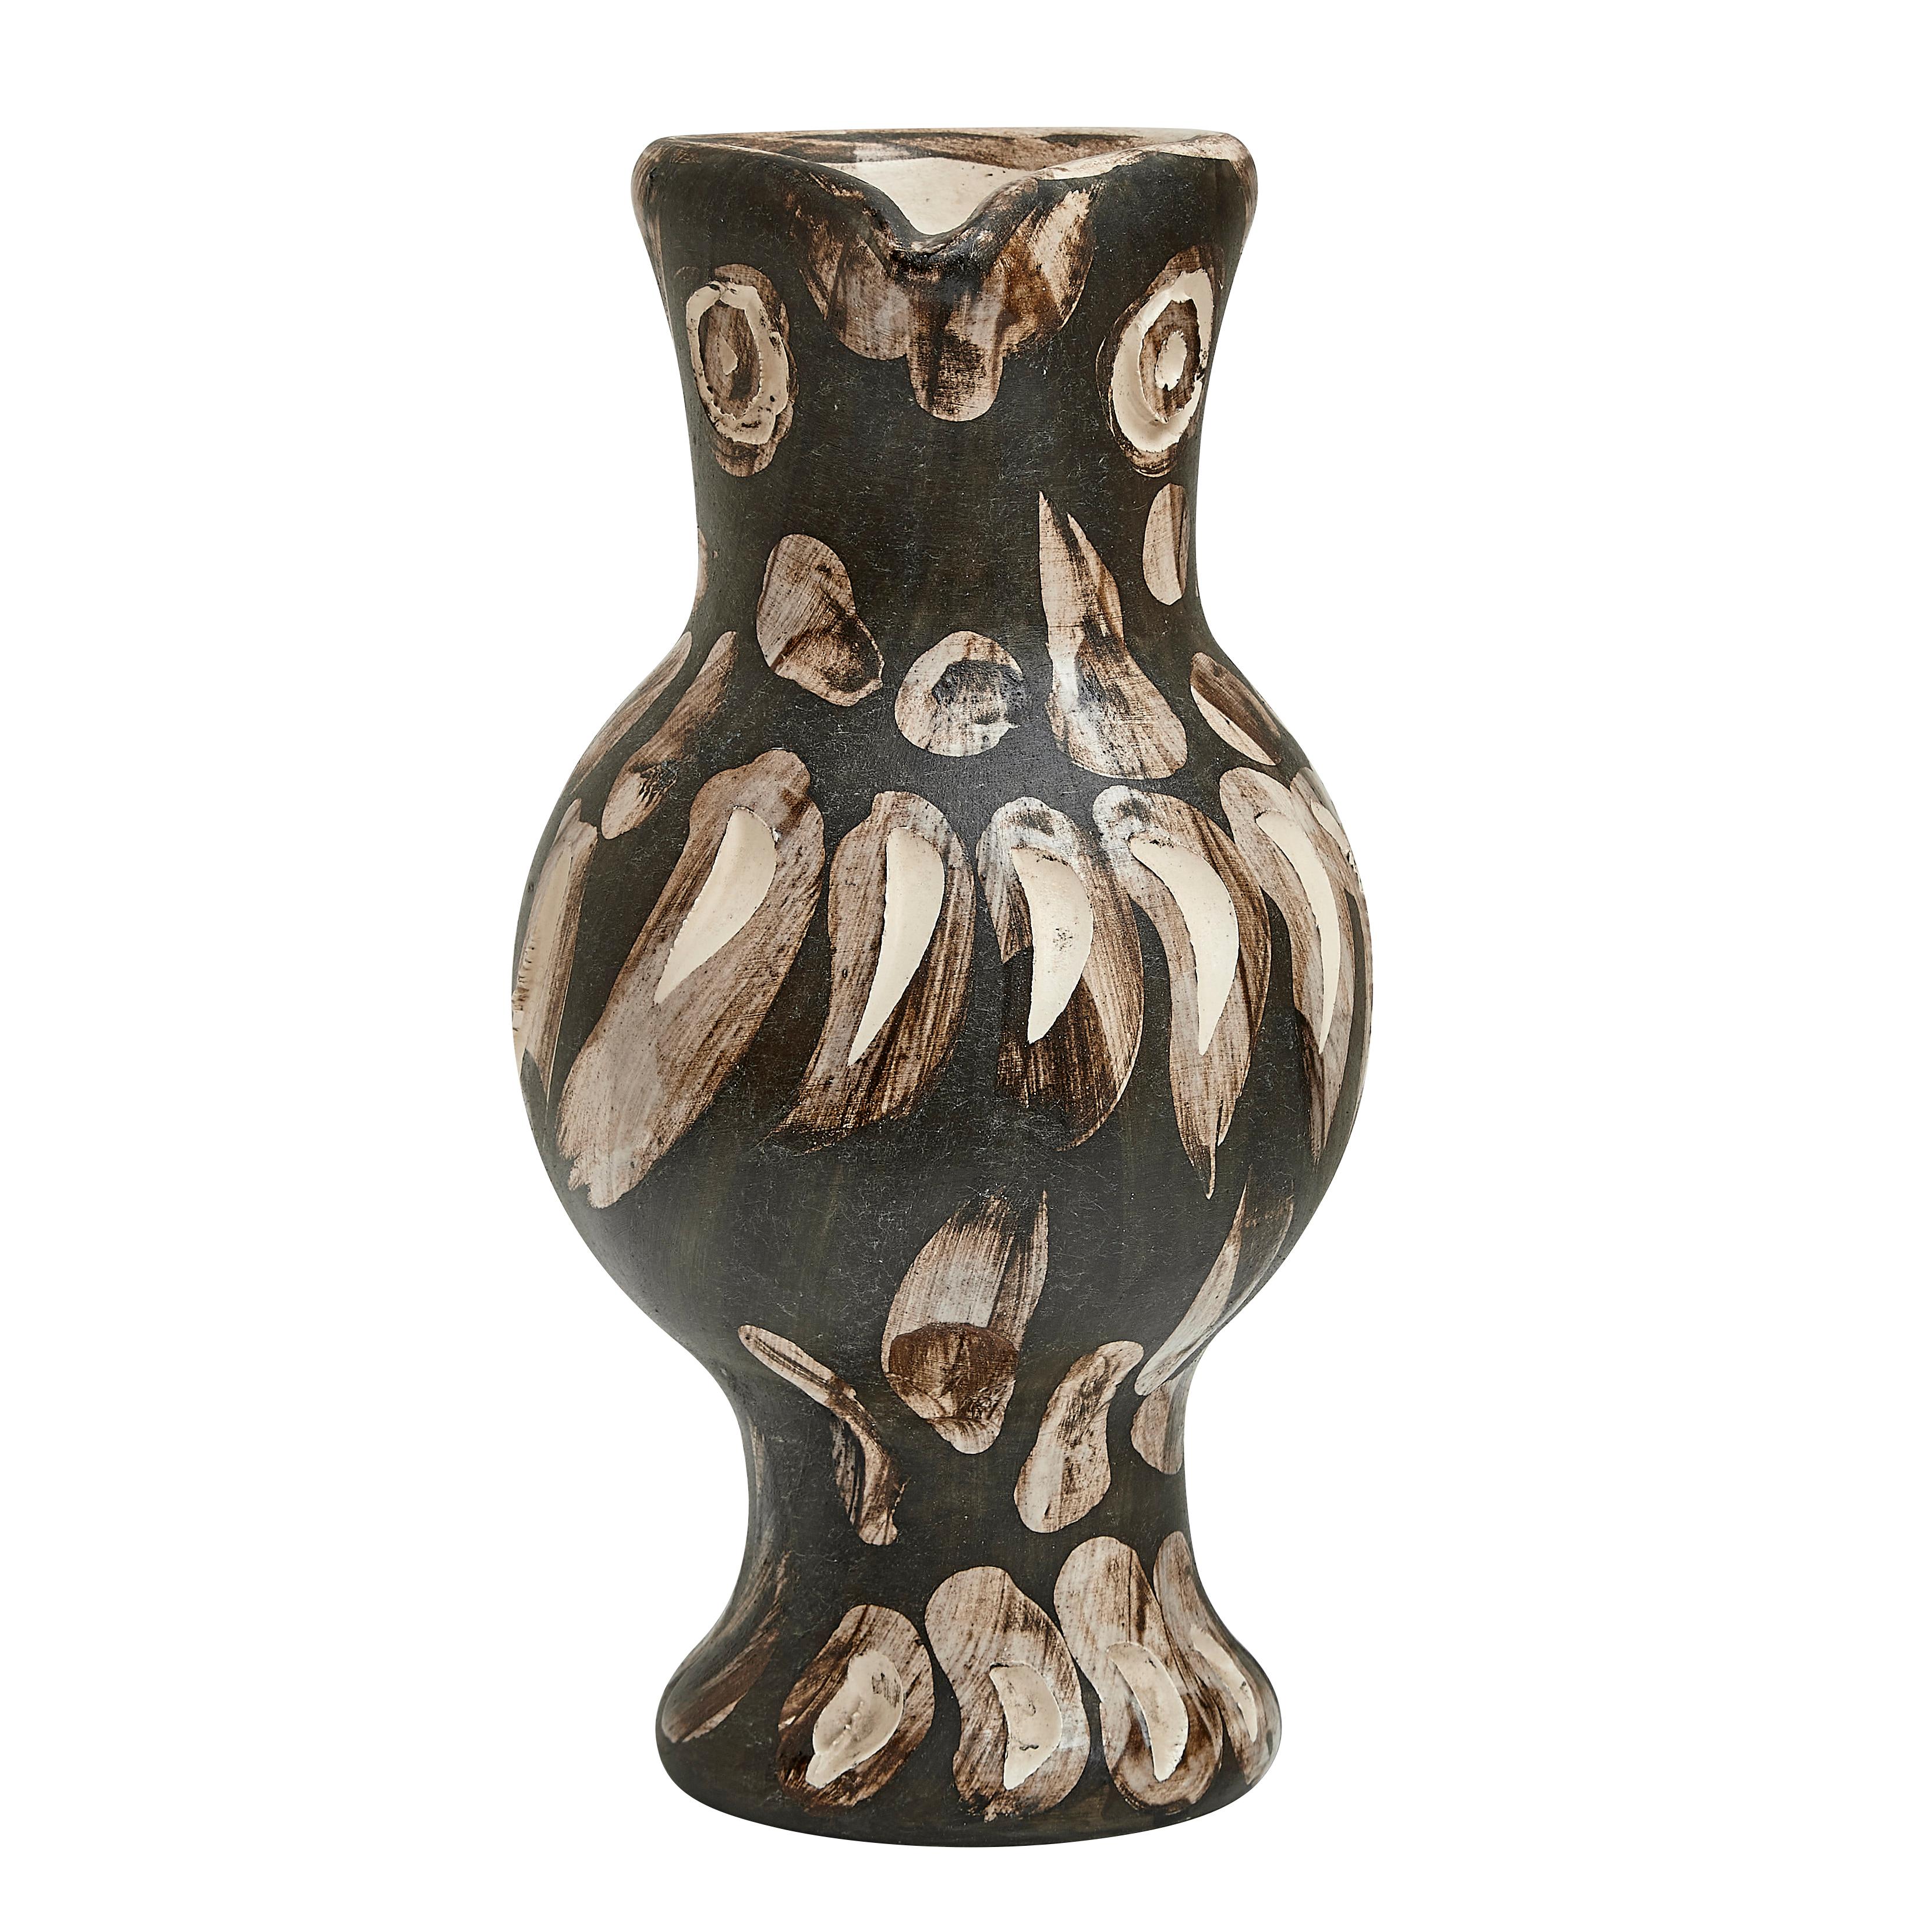 PABLO PICASSO (1881-1973) 
Chouette (A. R. 605) 

Terre de faïence vase, 1969, numbered 73/500, with the workshop numbering, incised 'Edition Picasso' and 'Madoura', partially glazed and painted, with the Edition Picasso and Madoura stamps.